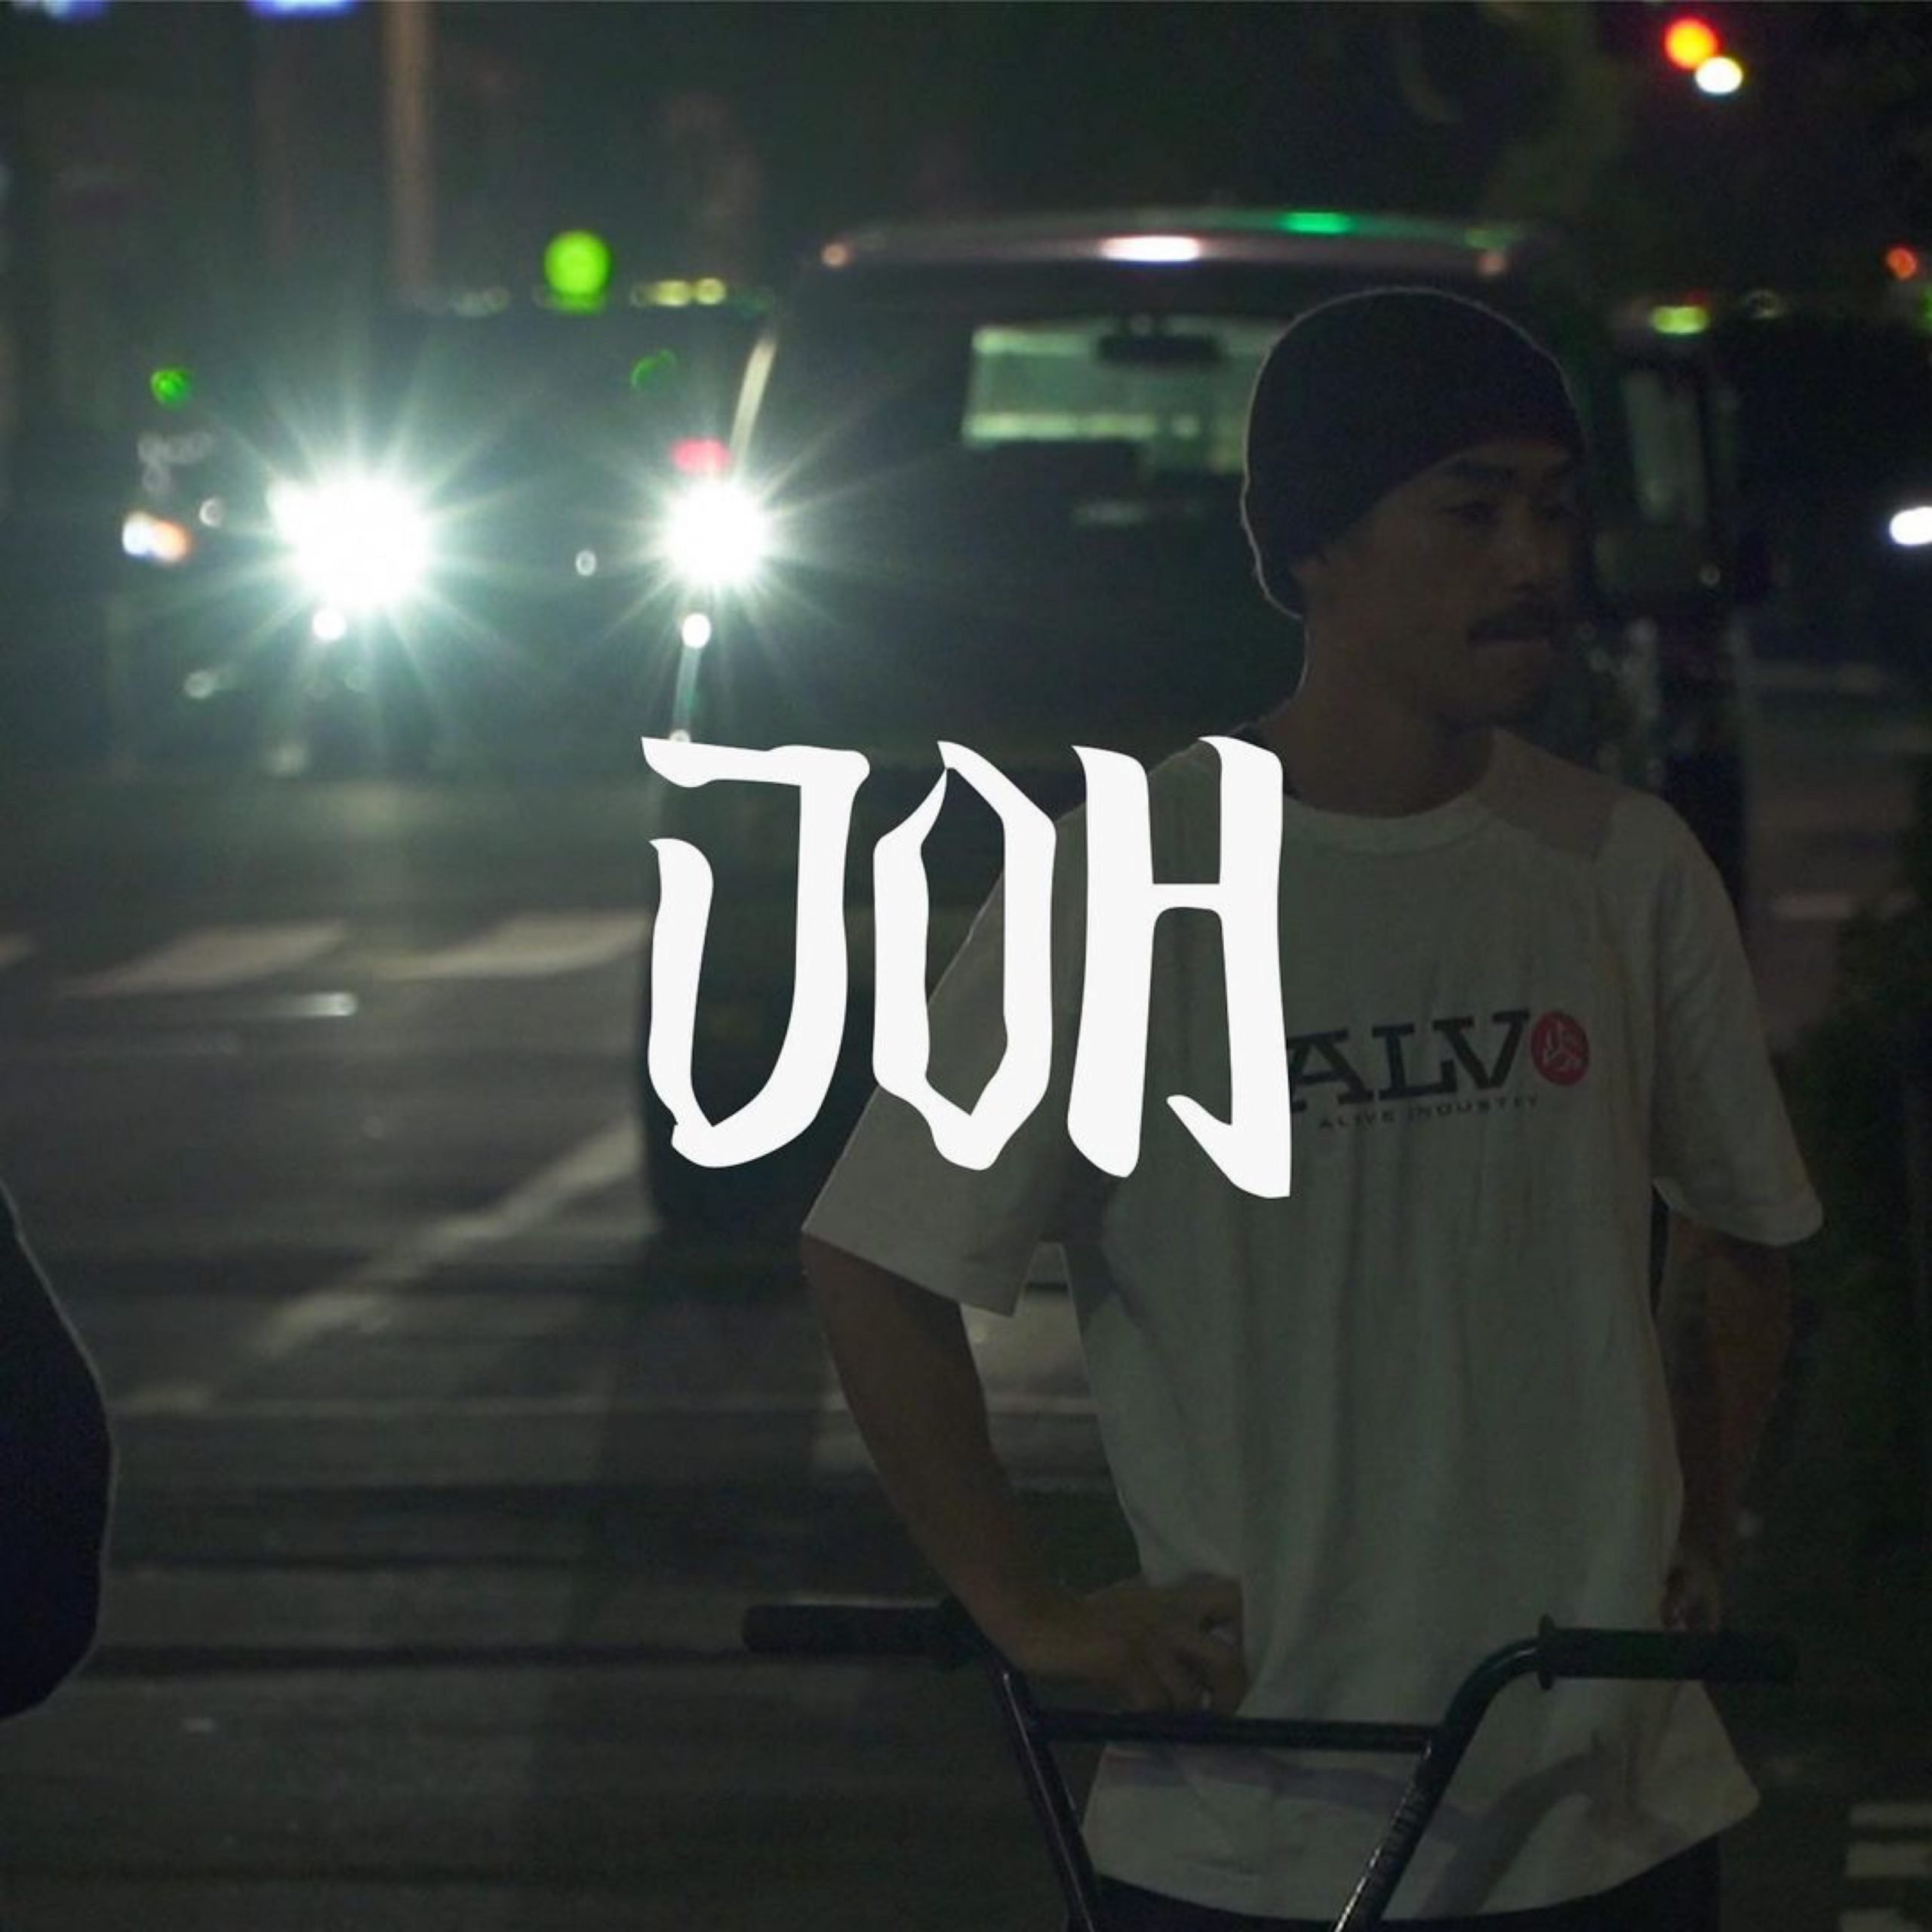 You are currently viewing [ENGLISH] PROJECT INTERVIEW01: 「常 : JOH」